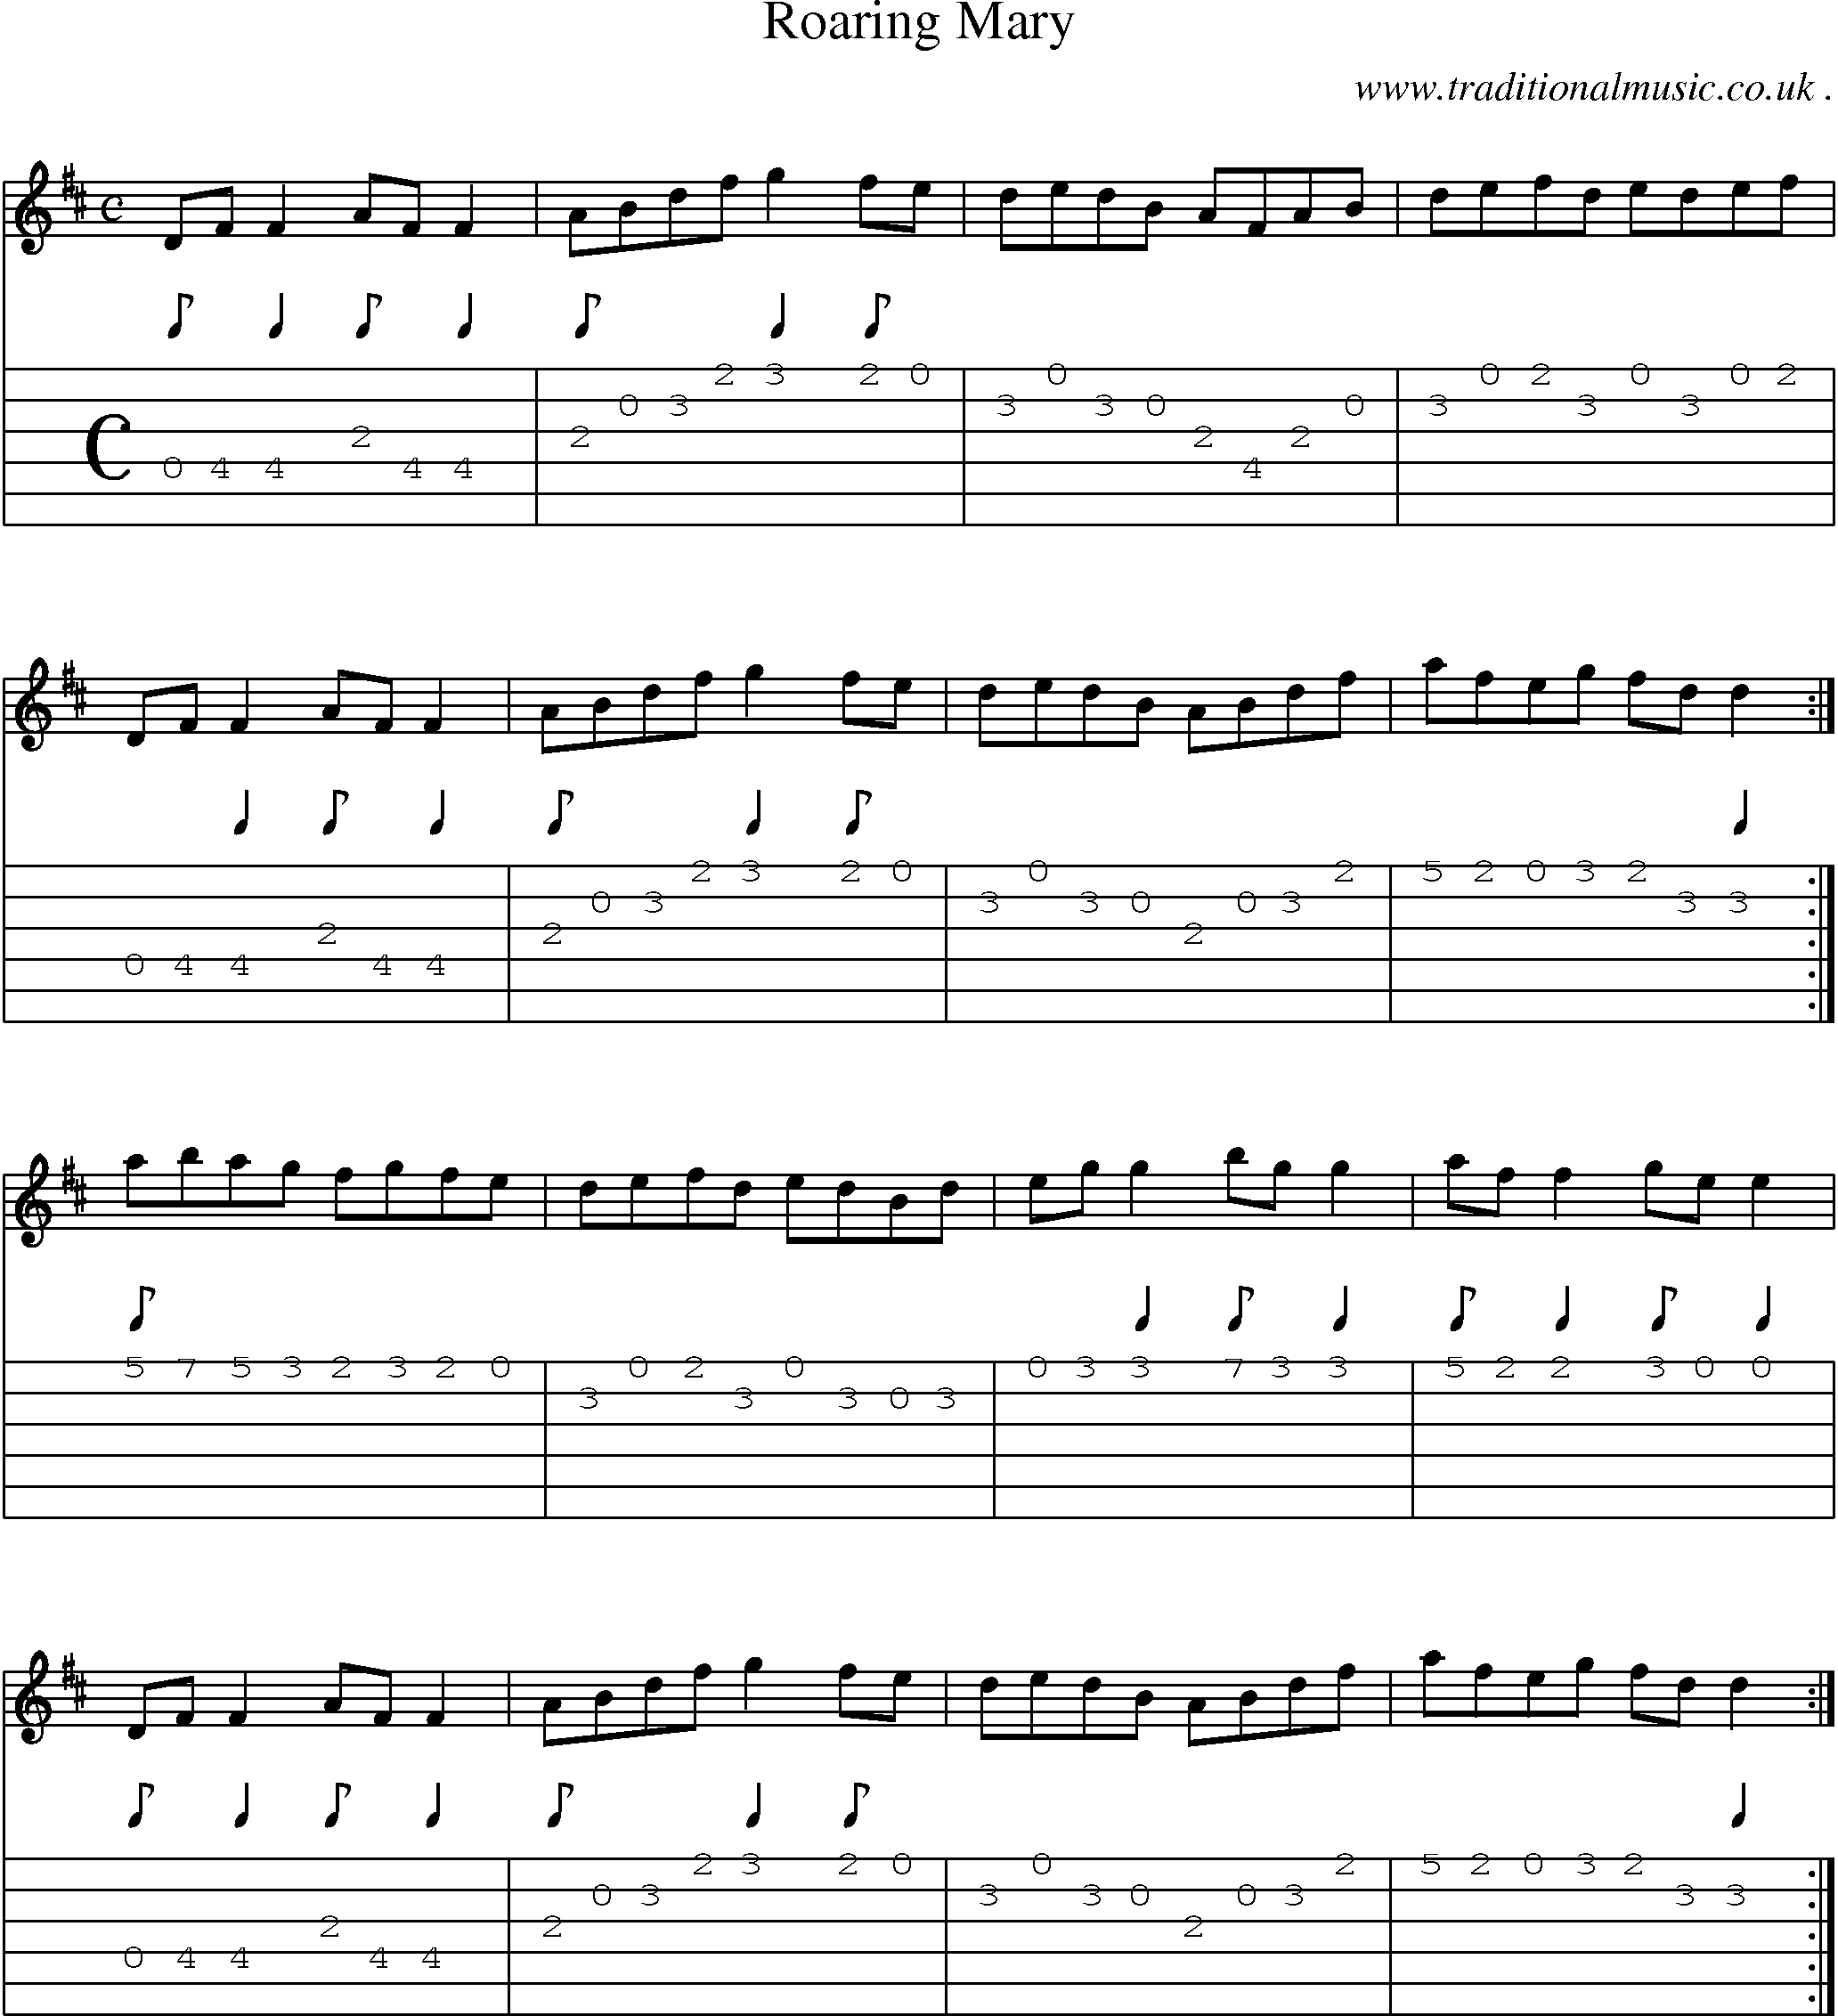 Sheet-Music and Guitar Tabs for Roaring Mary